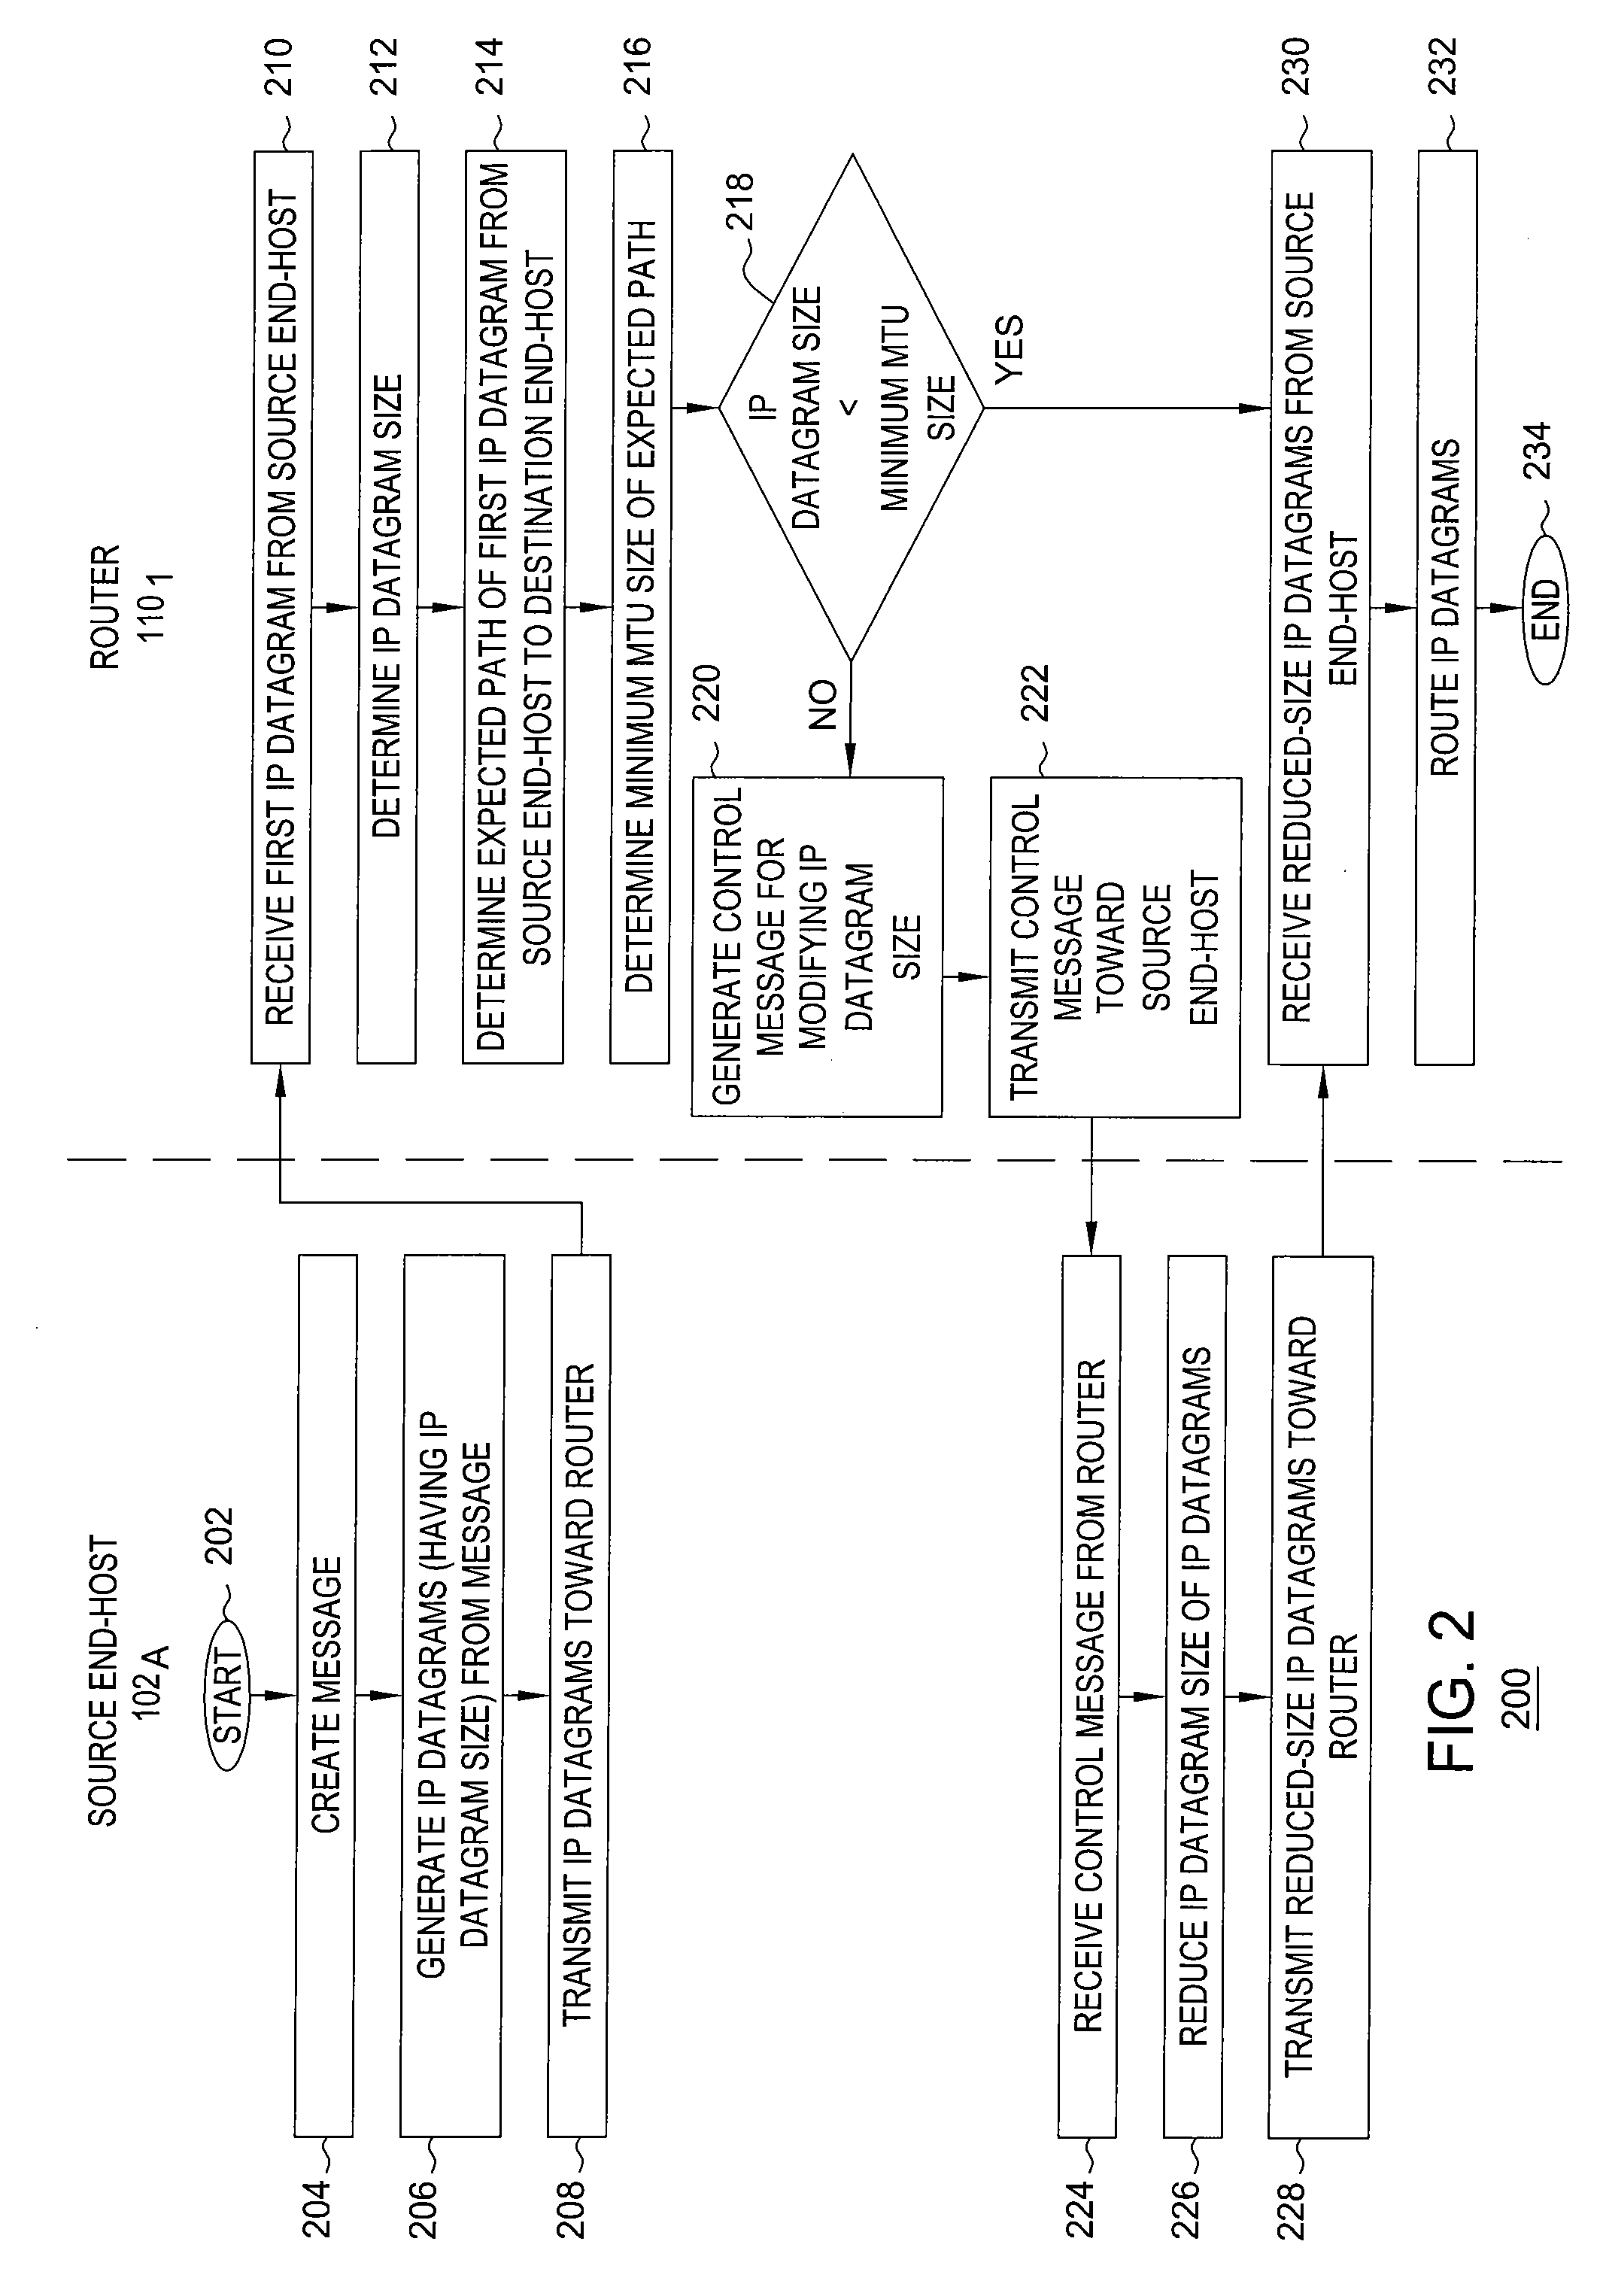 Method and Apparatus for Preventing IP Datagram Fragmentation and Reassembly